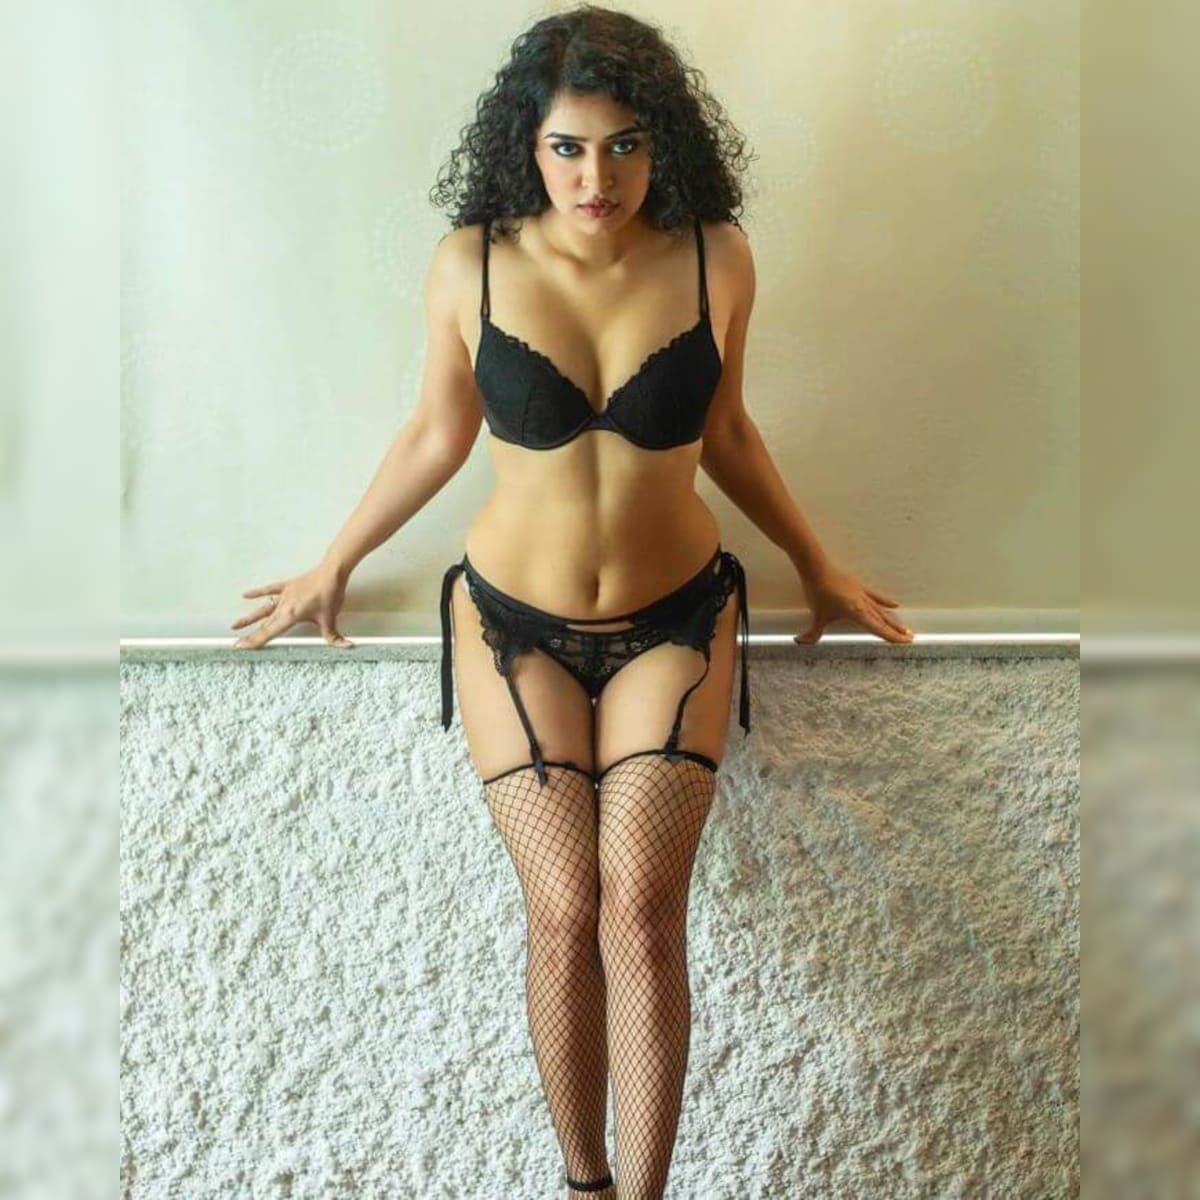 Apsara Rani Sets Internet On Fire Hot, Sexy Photos, See Diva Flaunting Her Curves